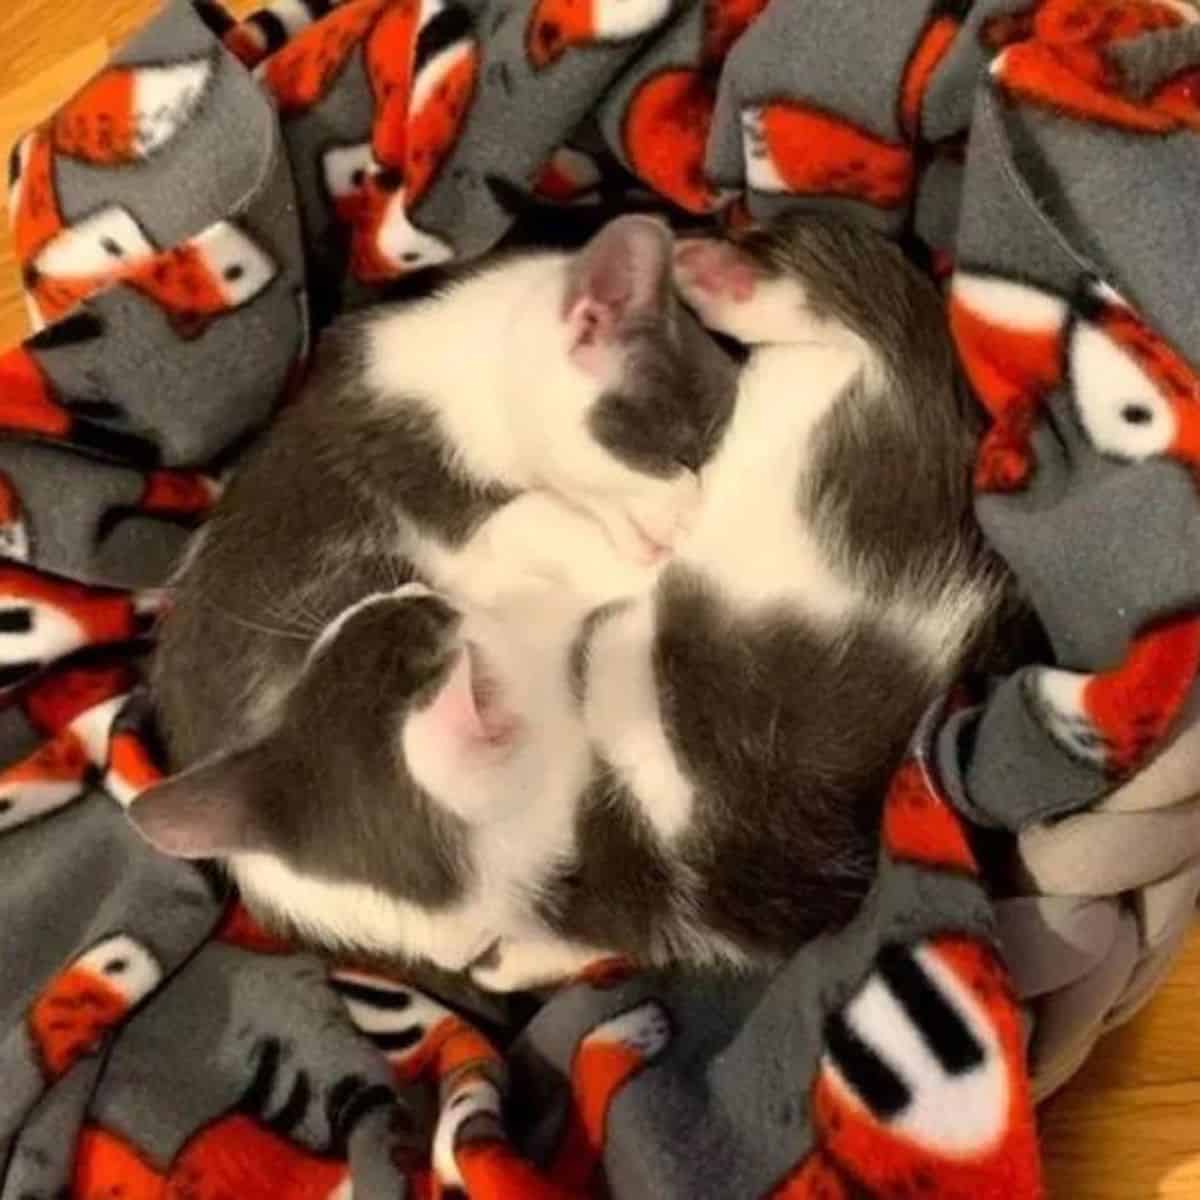 the kittens are lying next to each other on the blanket